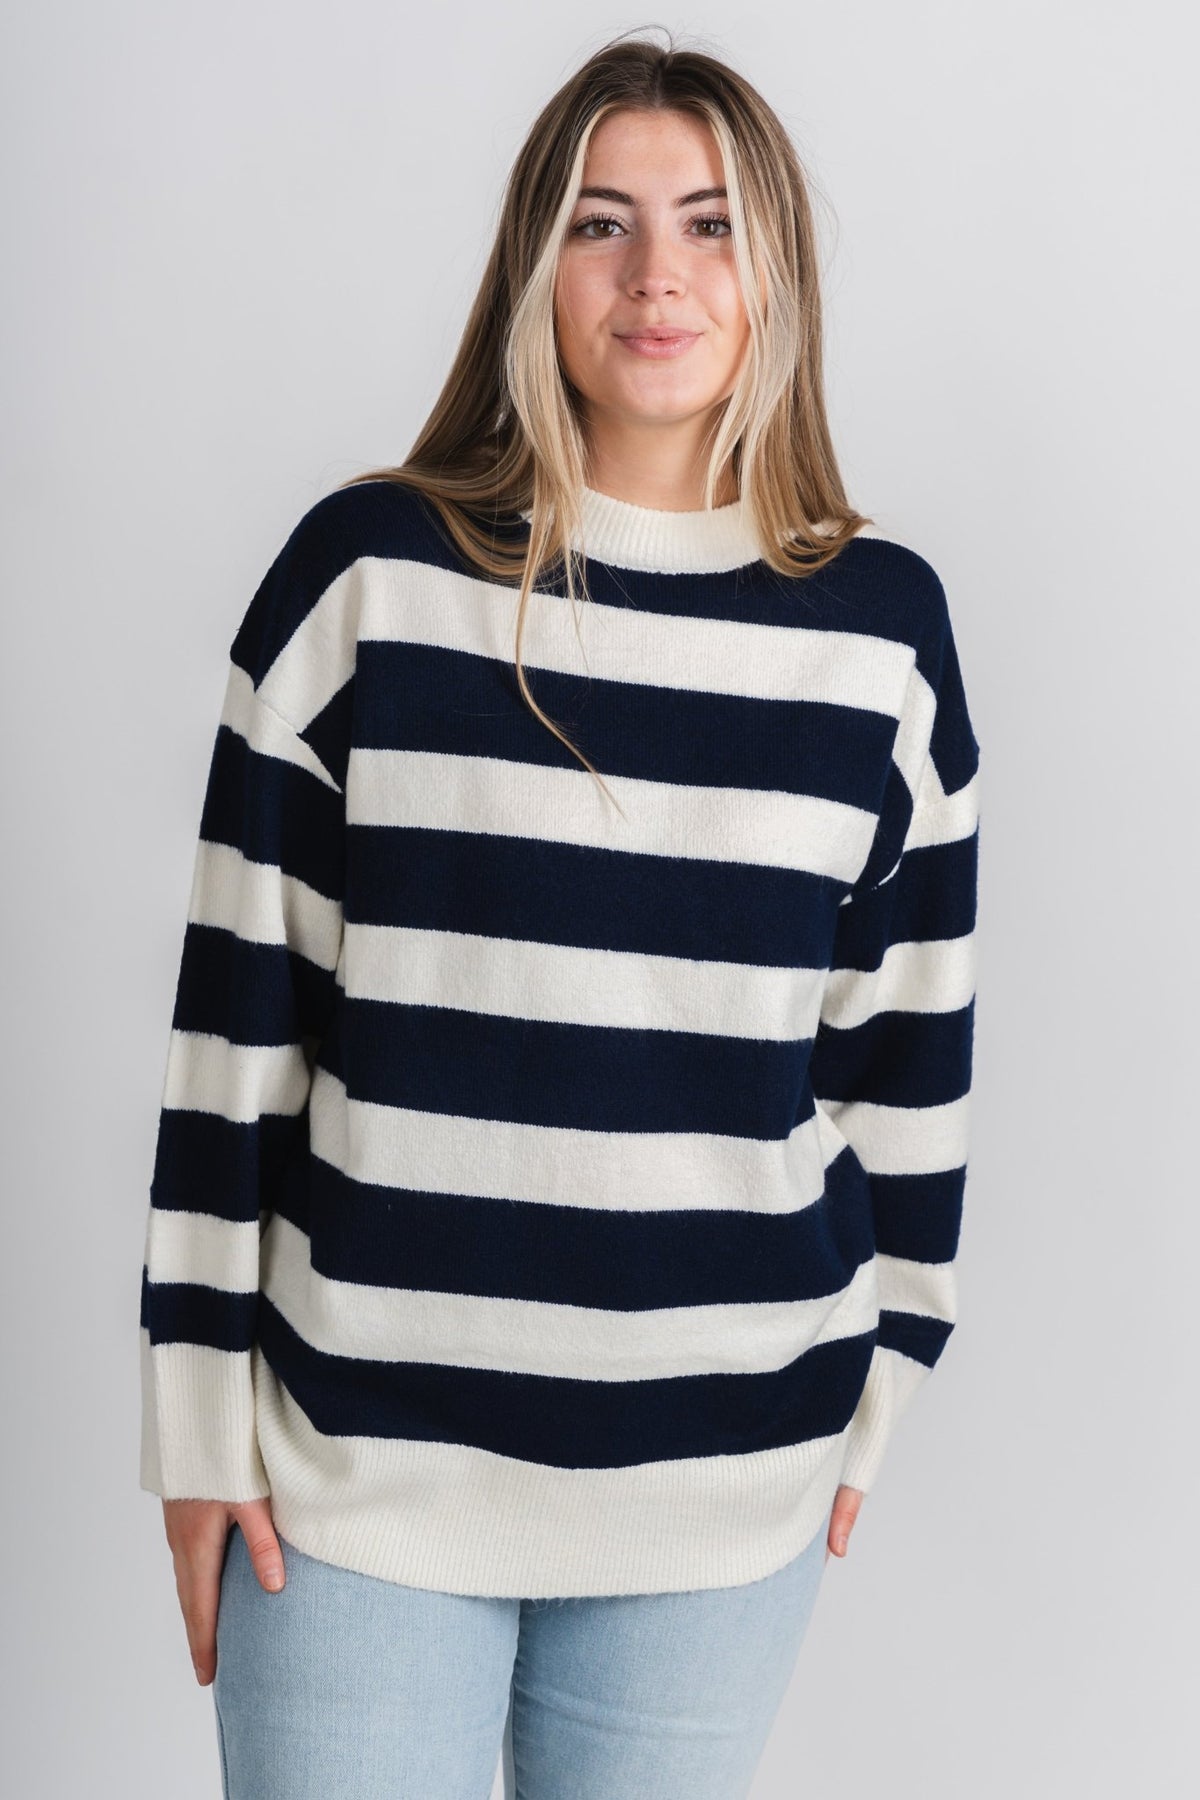 Oversized striped sweater ivory/navy - Trendy OKC Apparel at Lush Fashion Lounge Boutique in Oklahoma City